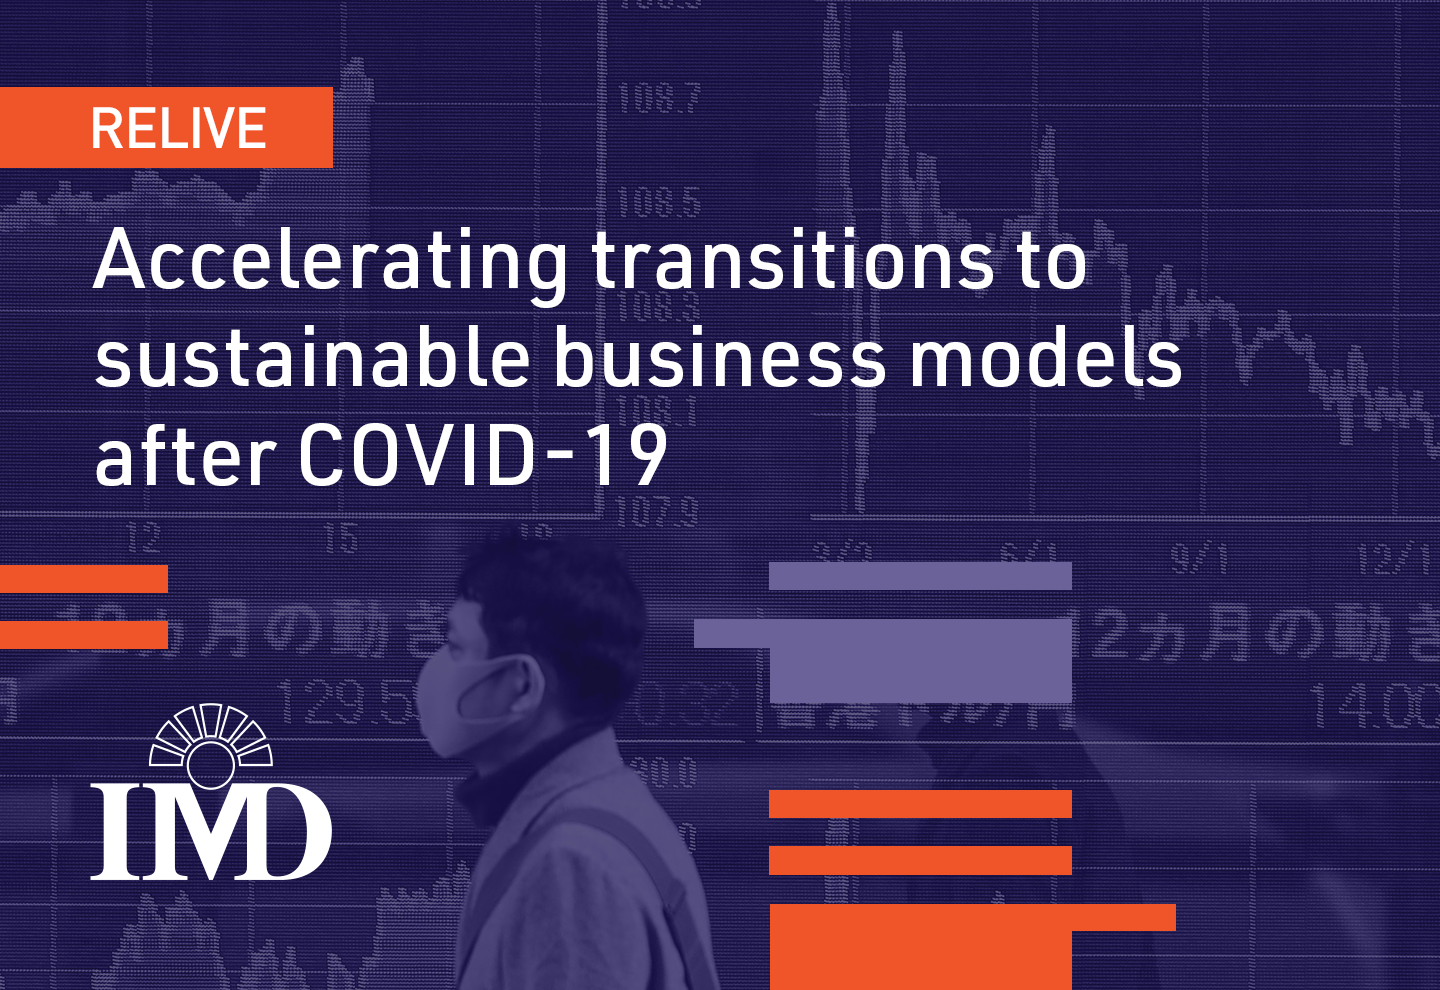 Accelerating transitions to sustainable business models after COVID-19